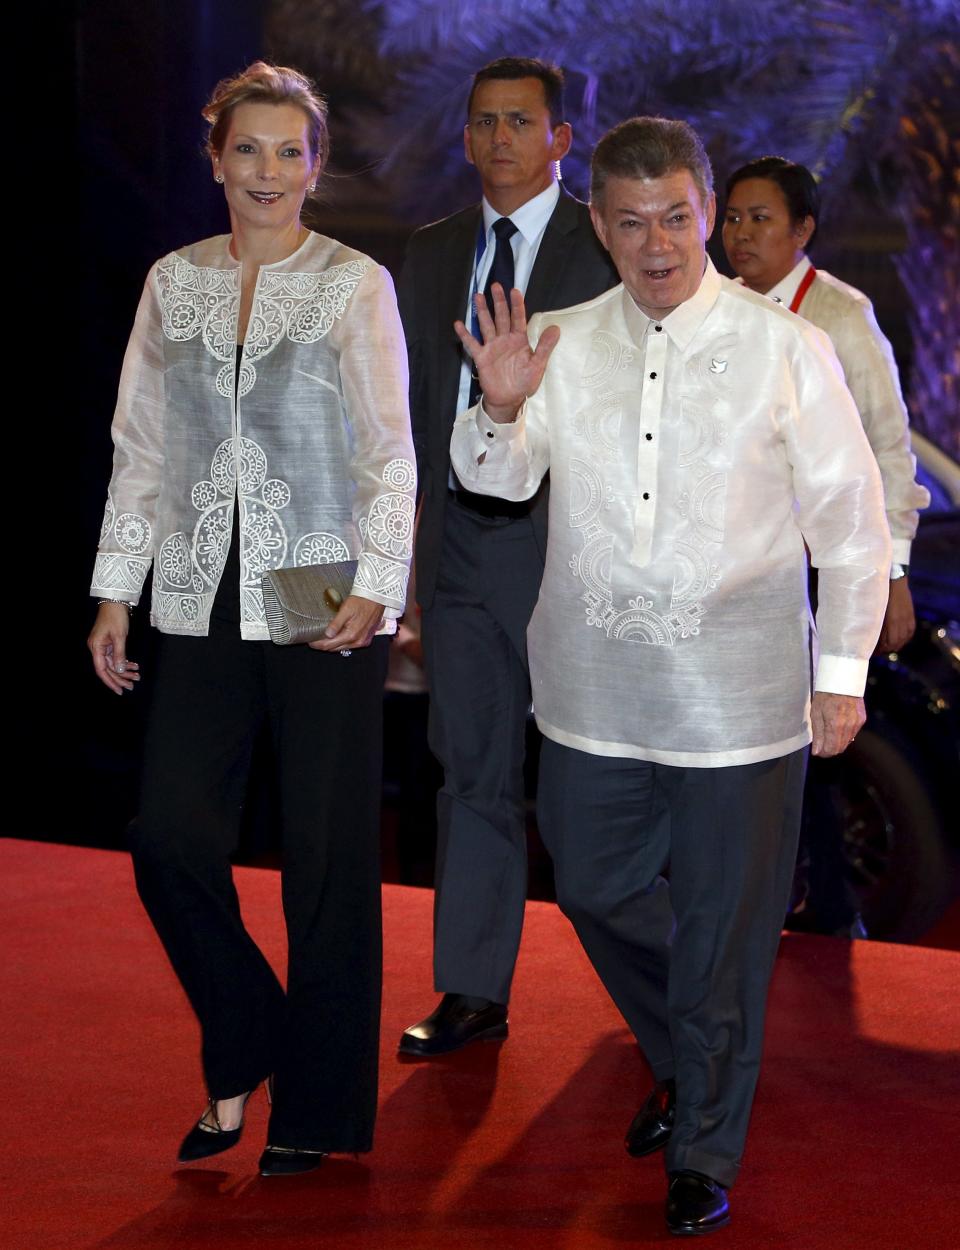 Colombia's President Santos, wearing the traditional Philippine "barong", and his wife Rodriguez Munera for a welcome dinner during the Asia-Pacific Economic Cooperation (APEC) summit in the capital city of Manila, Philippines